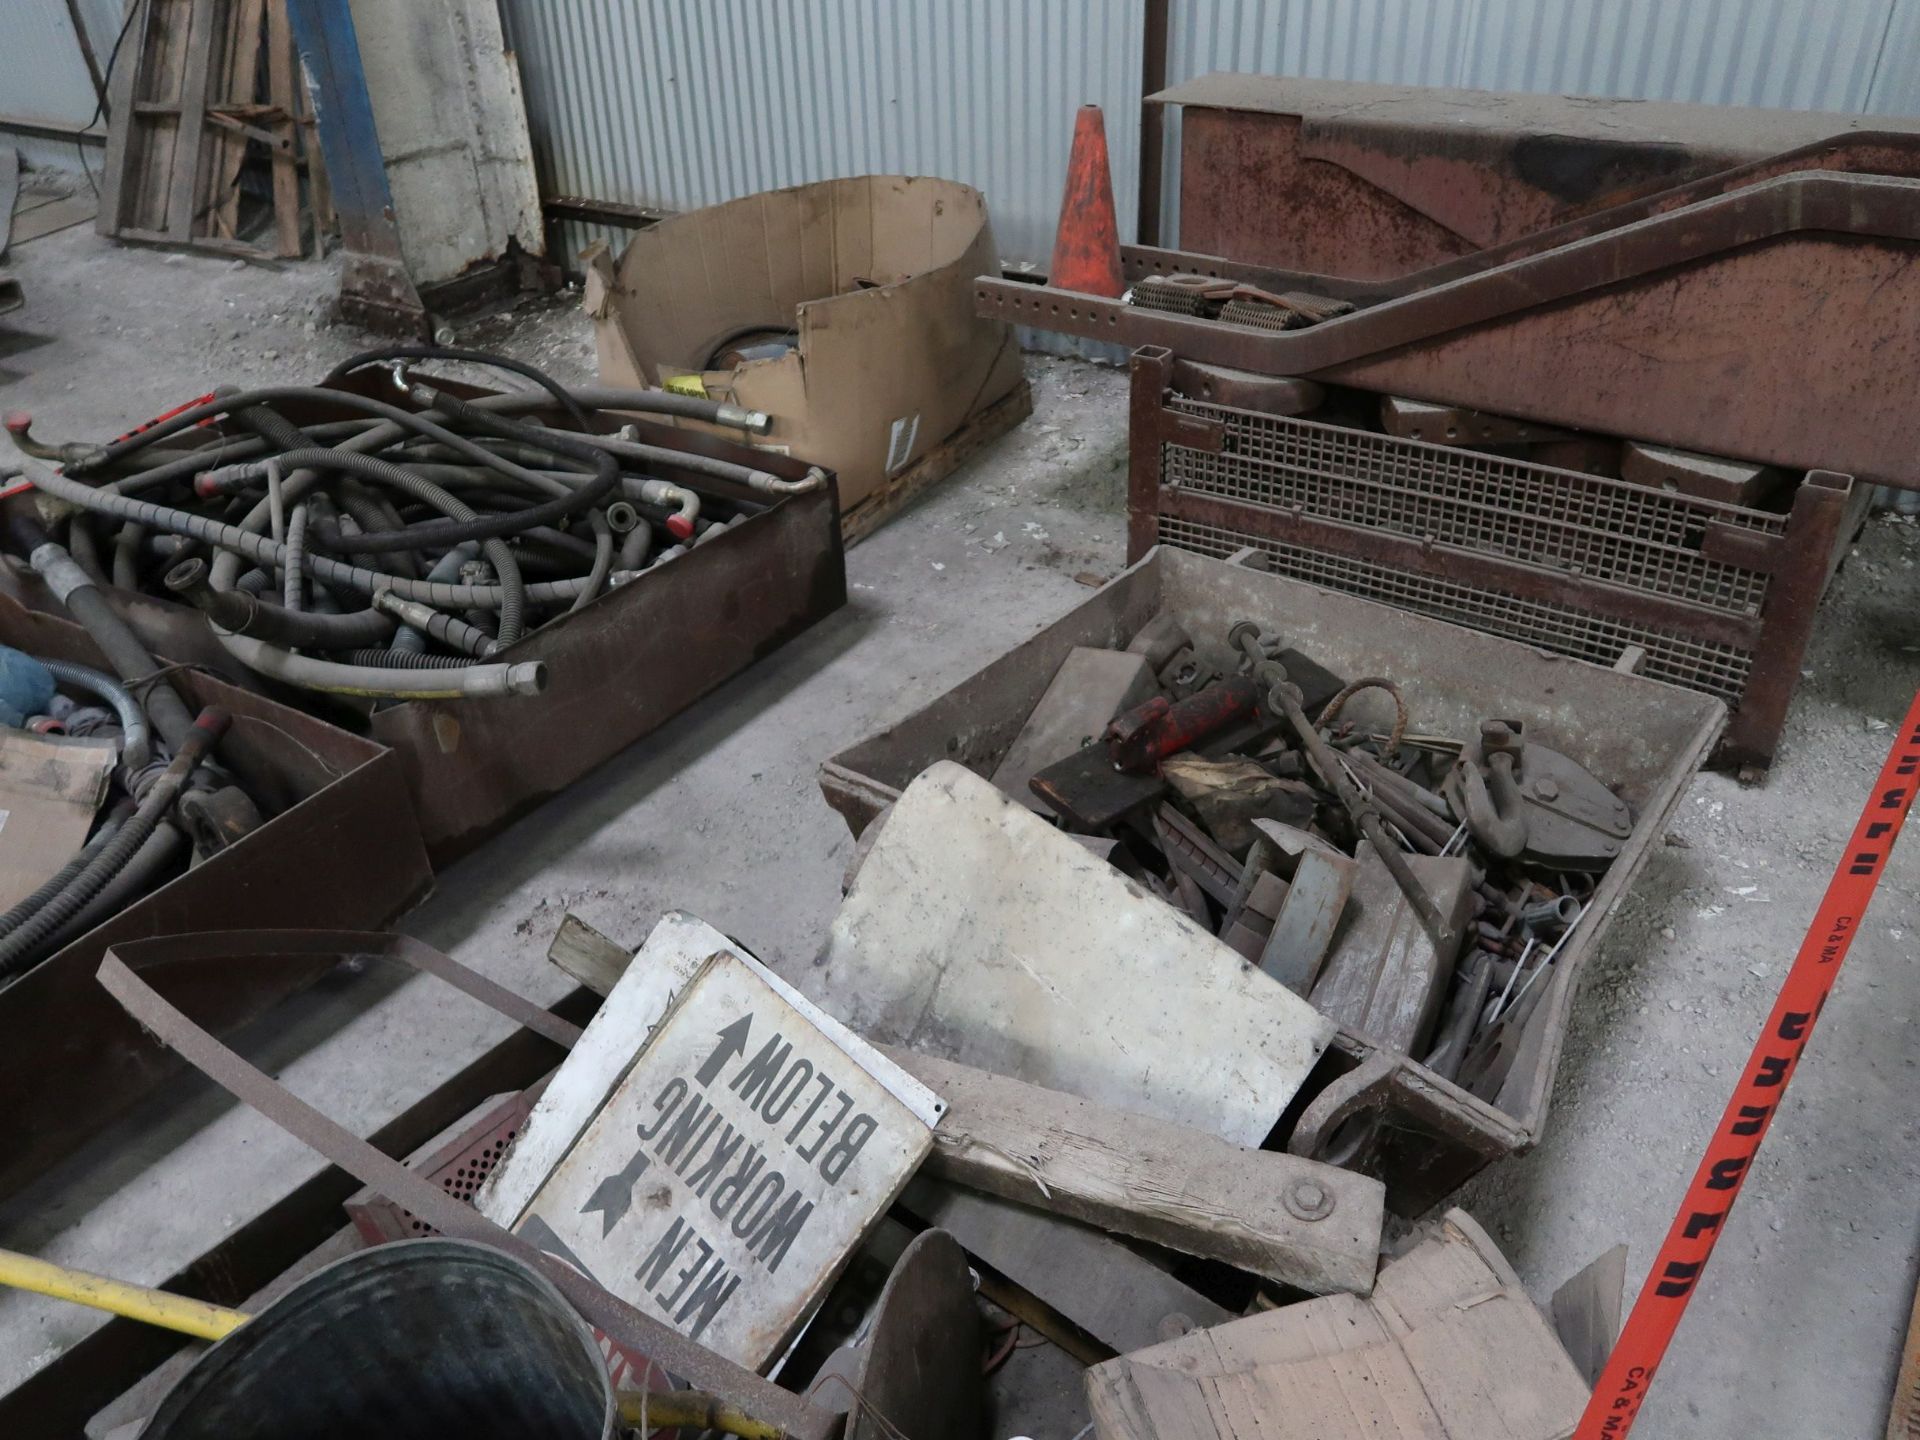 (LOT) ASSORTED PARTS, LP GAS ENGINE, SAFETY LIGHT, STEEL TOTES - Image 3 of 4